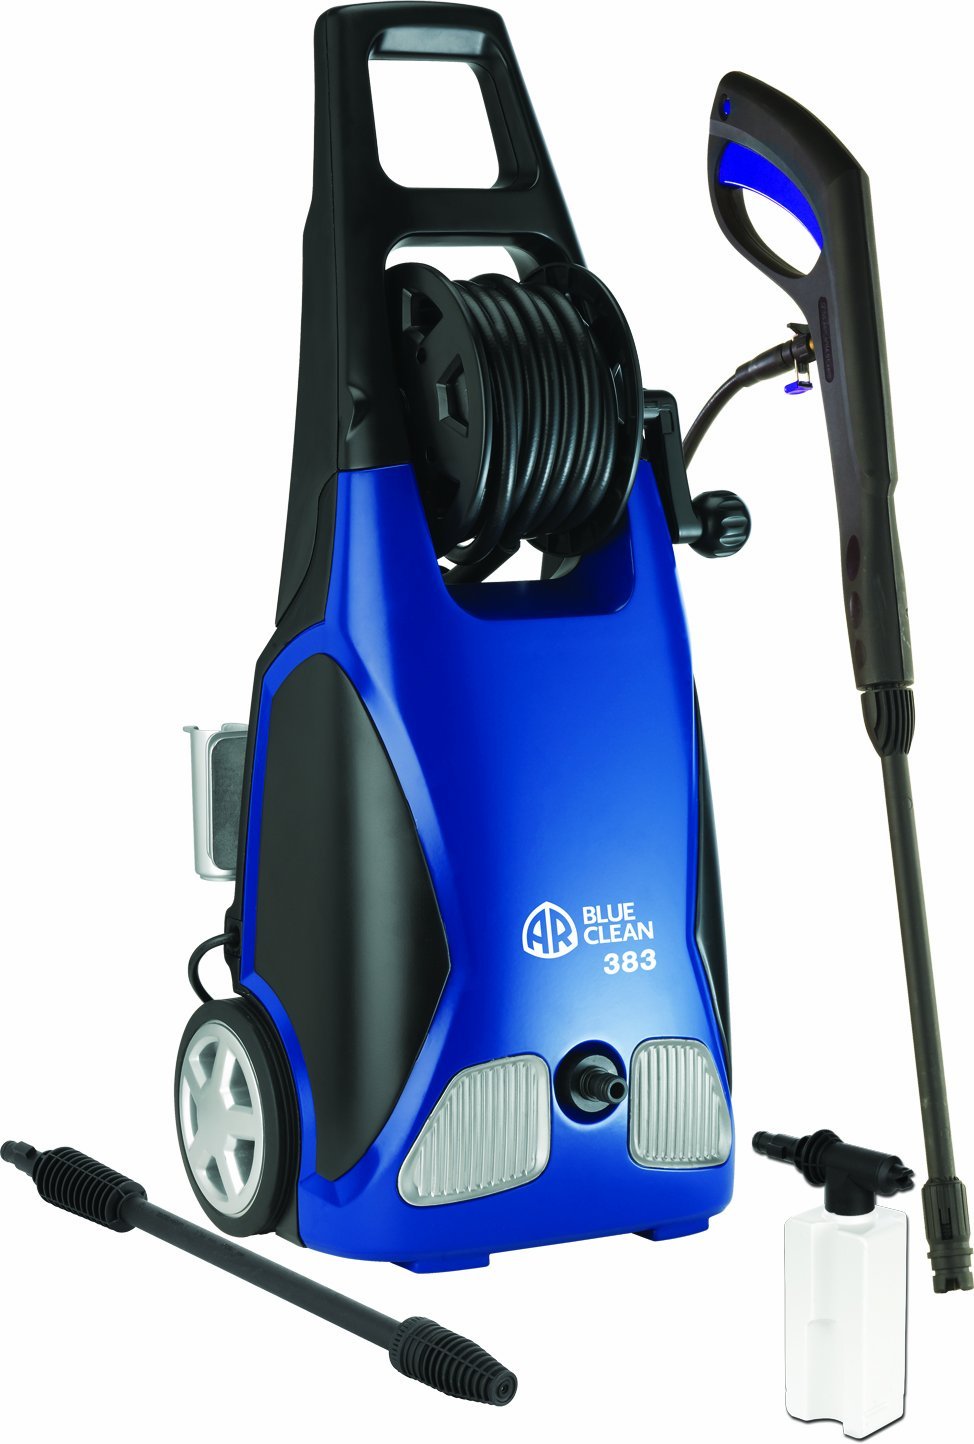 Review of AR Blue Clean AR383 1,900 PSI 1.5 GPM 14 Amp Electric Pressure Washer with Hose Reel